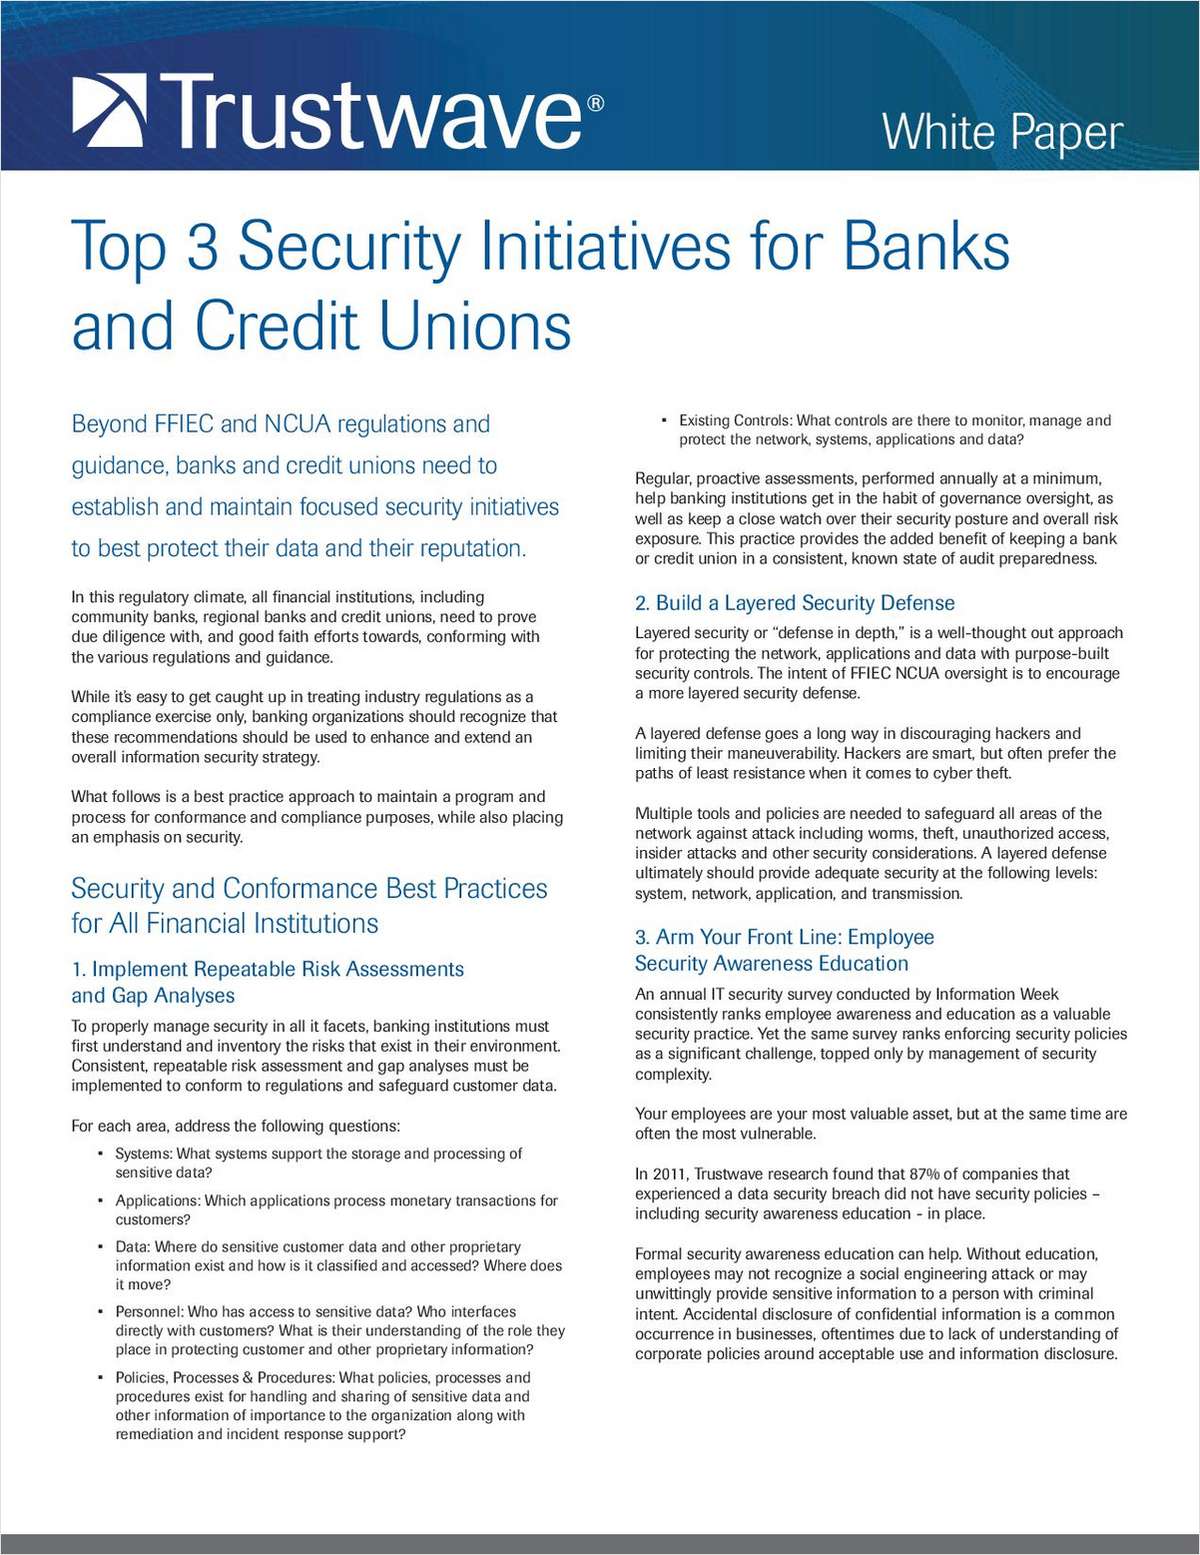 Top 3 Security Initiatives for Banks and Credit Unions